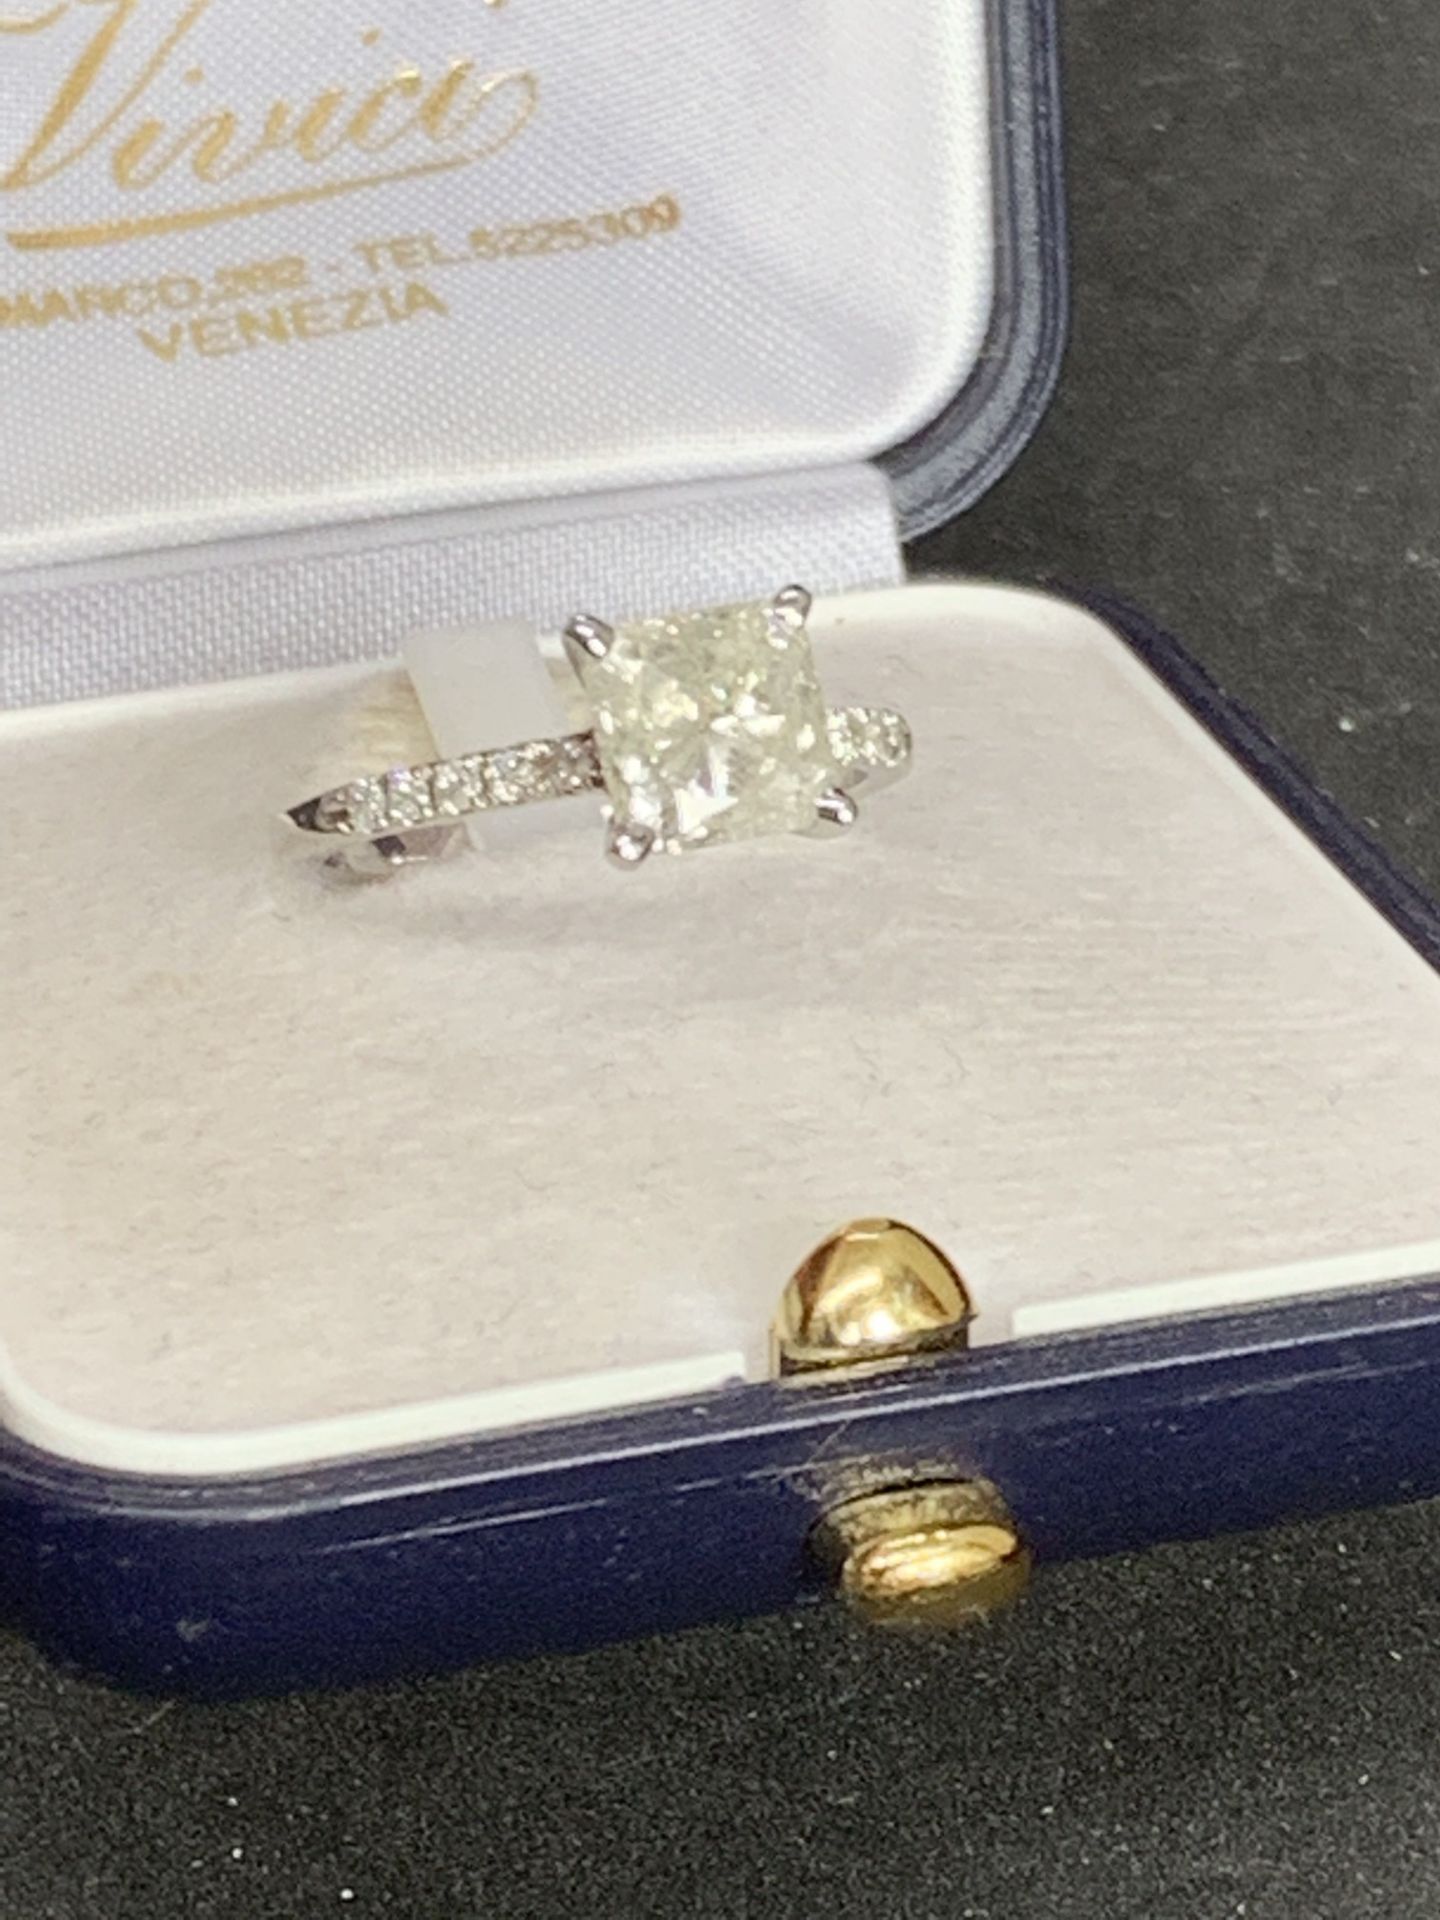 2.10ct RADIANT CUT DIAMOND SOLITAIRE RING SET IN WHITE METAL TESTED AS WHITE GOLD - Image 3 of 6